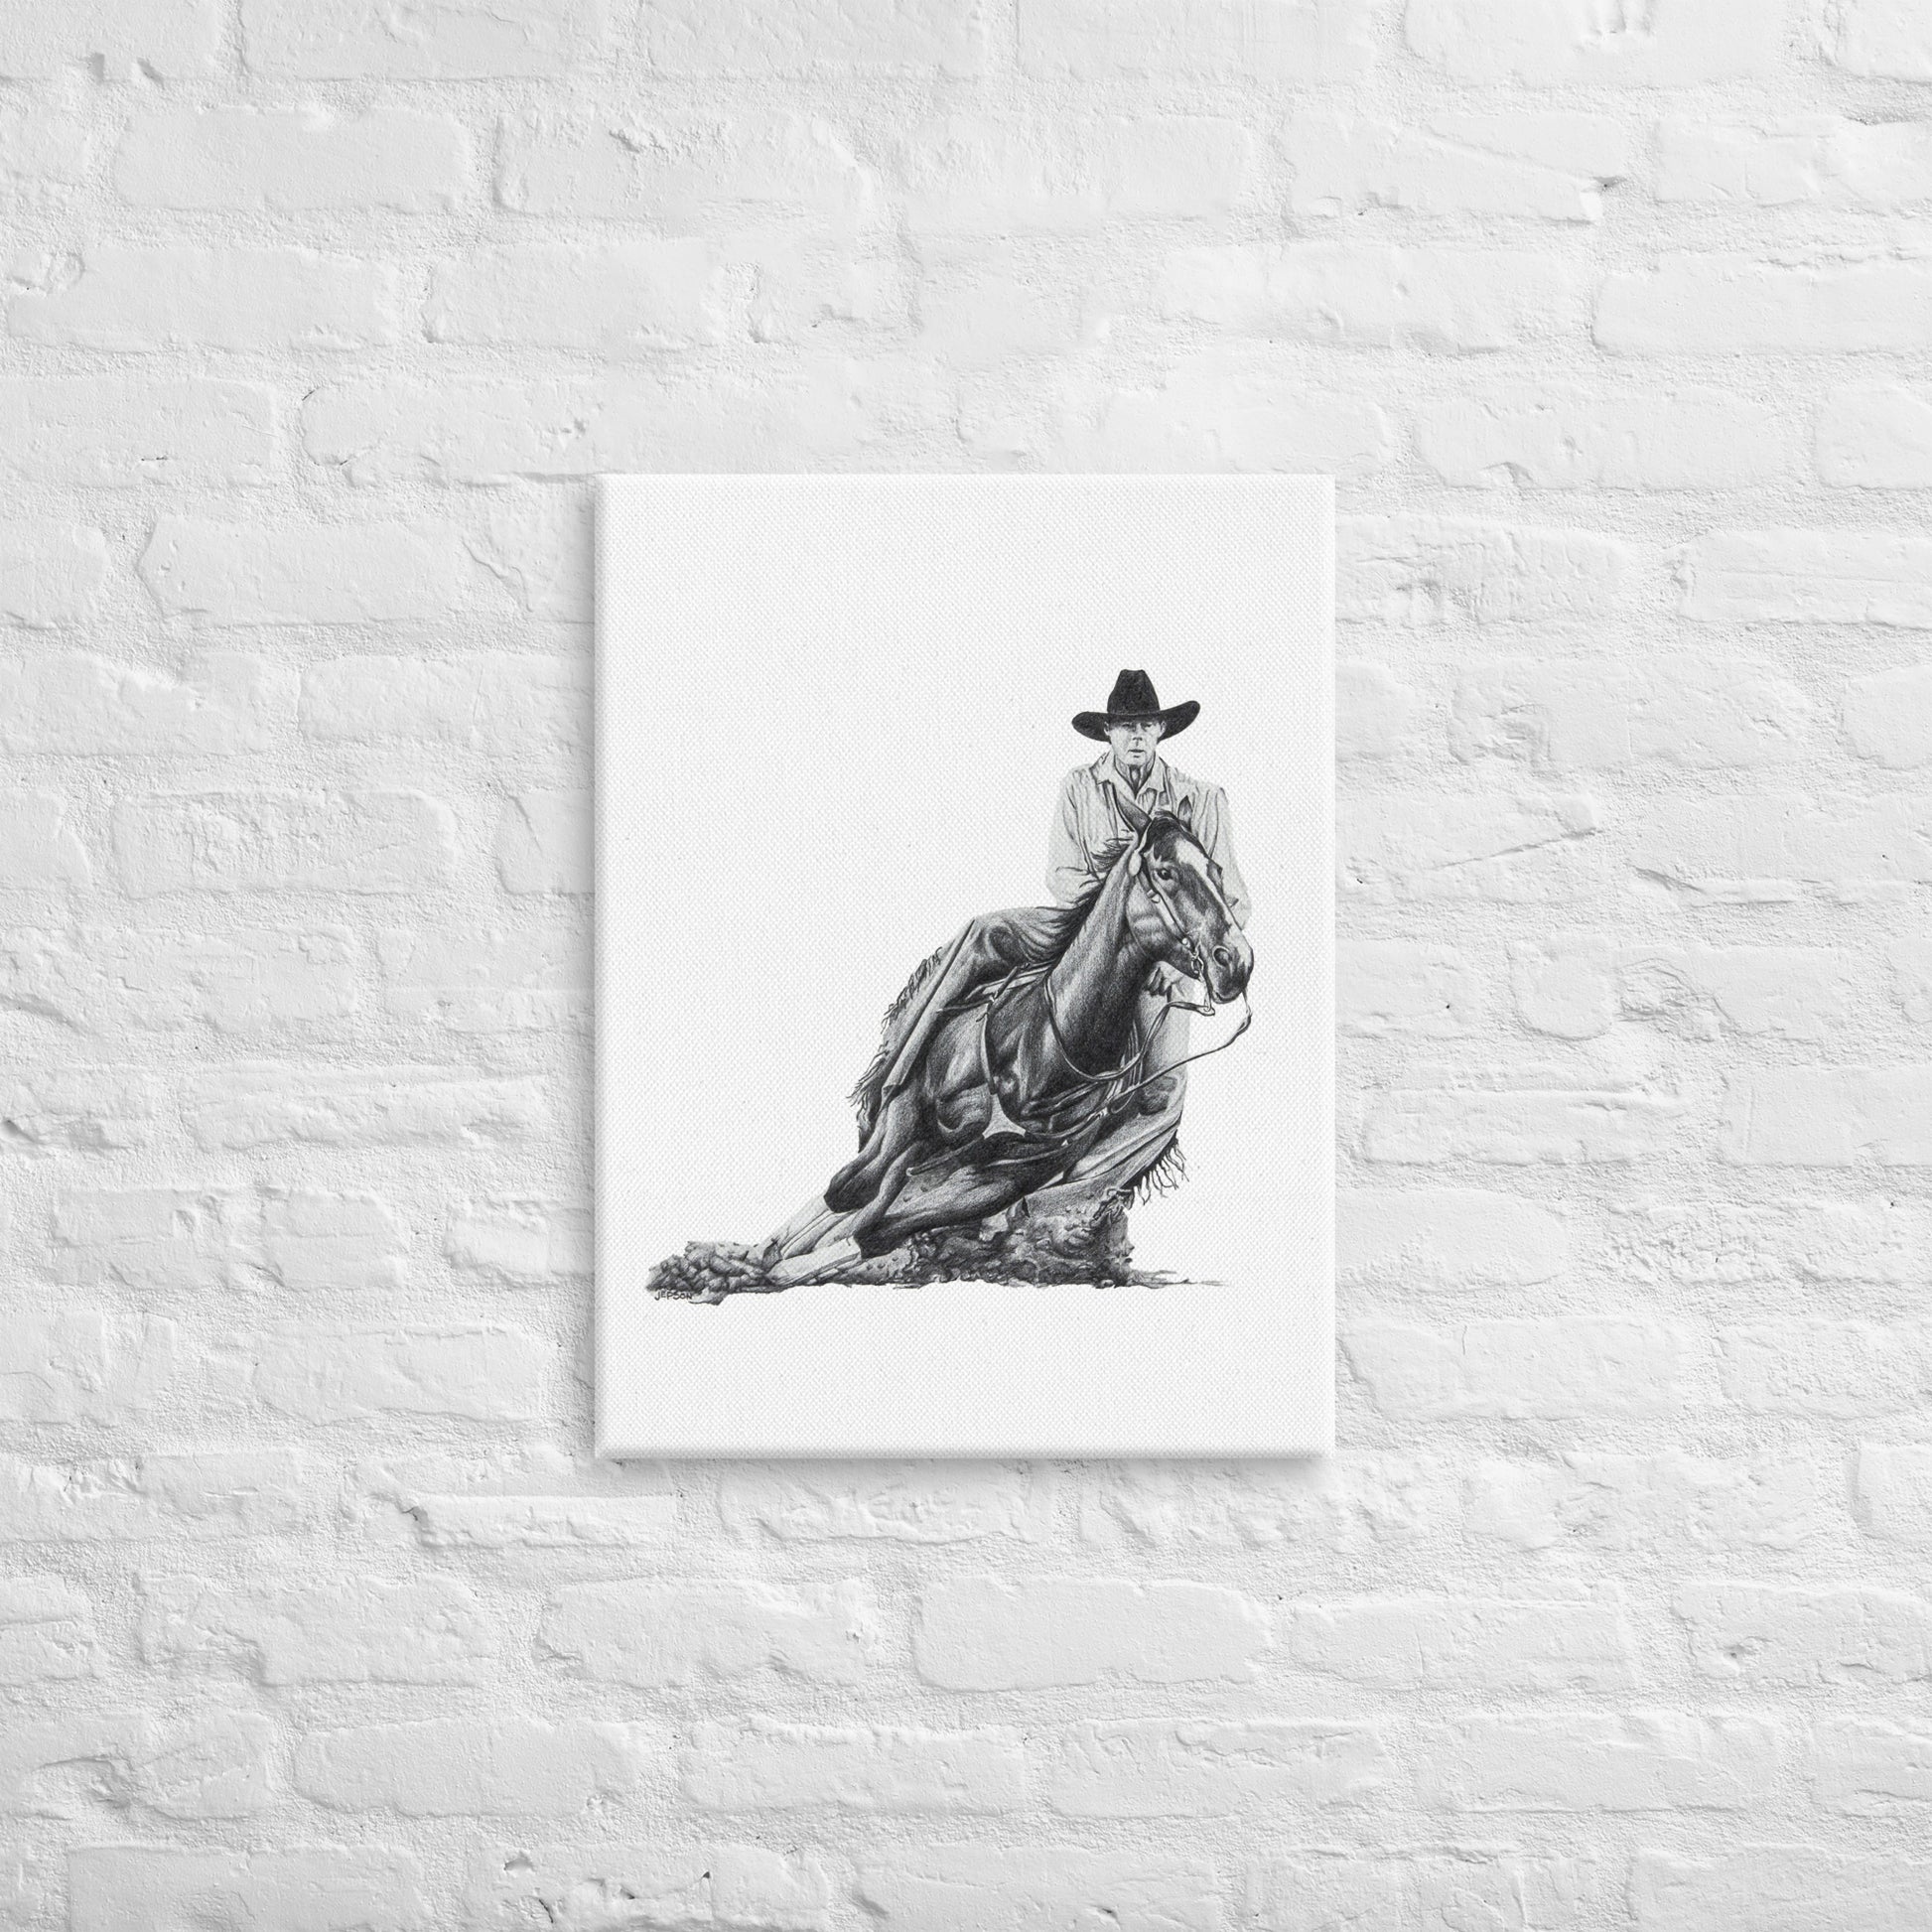 These "Cowboy Canvas Wall Hangings" are from a drawing of mine created with graphite pencil. It is titled "A Cut Above" as it is a cowboy on a cutting horse. It has been digitally optimized and transferred to a poly-cotton blend canvas.